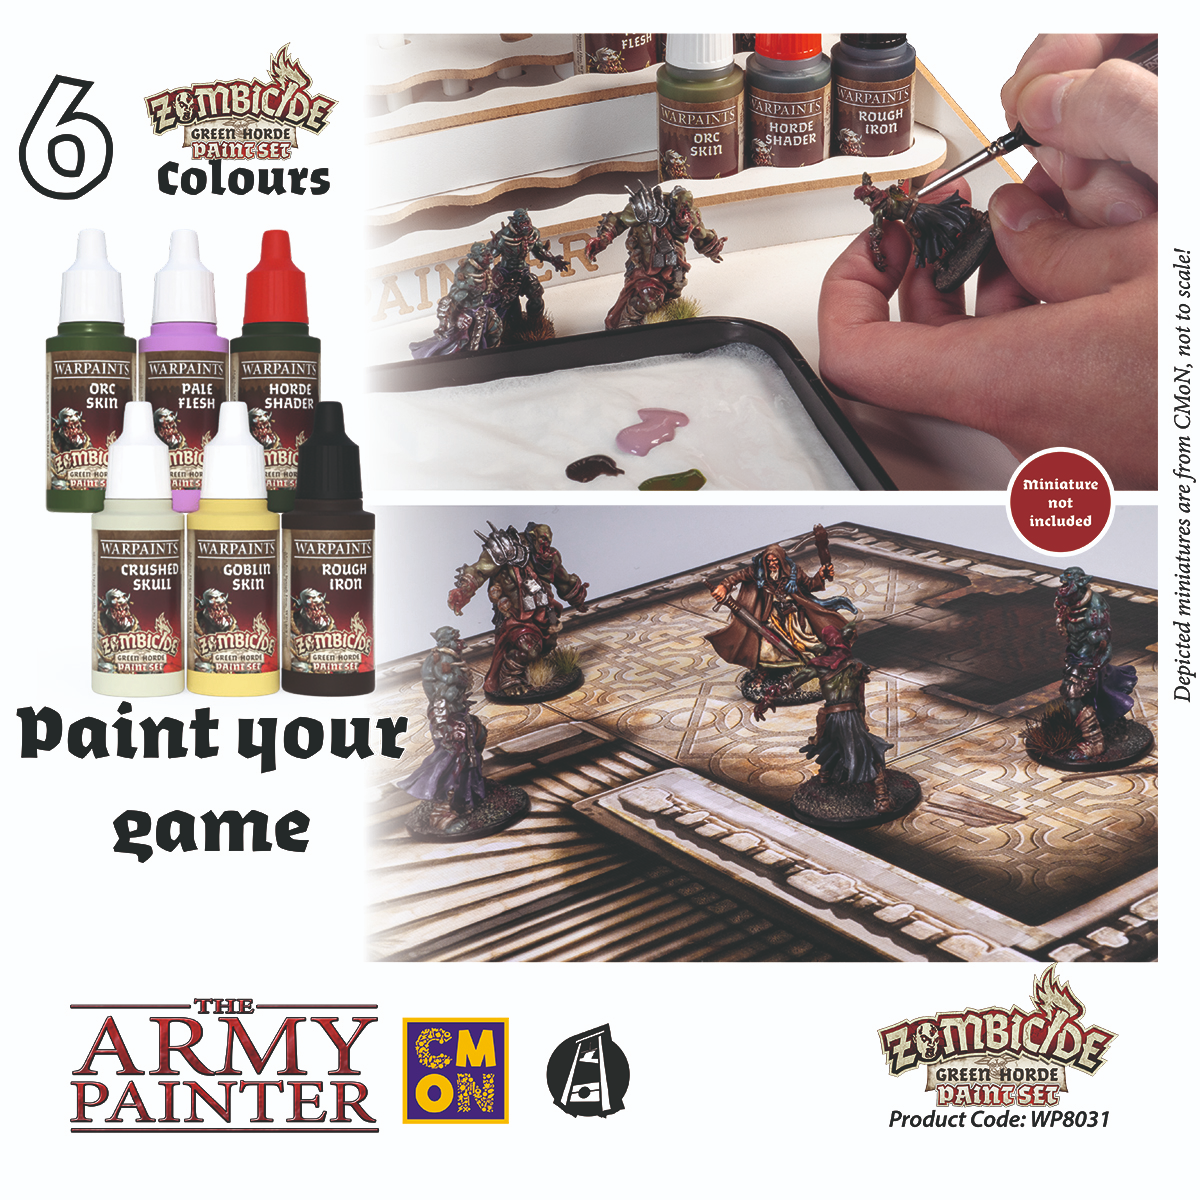 The Army Painter - Zombicide: Green Horde Paint Set